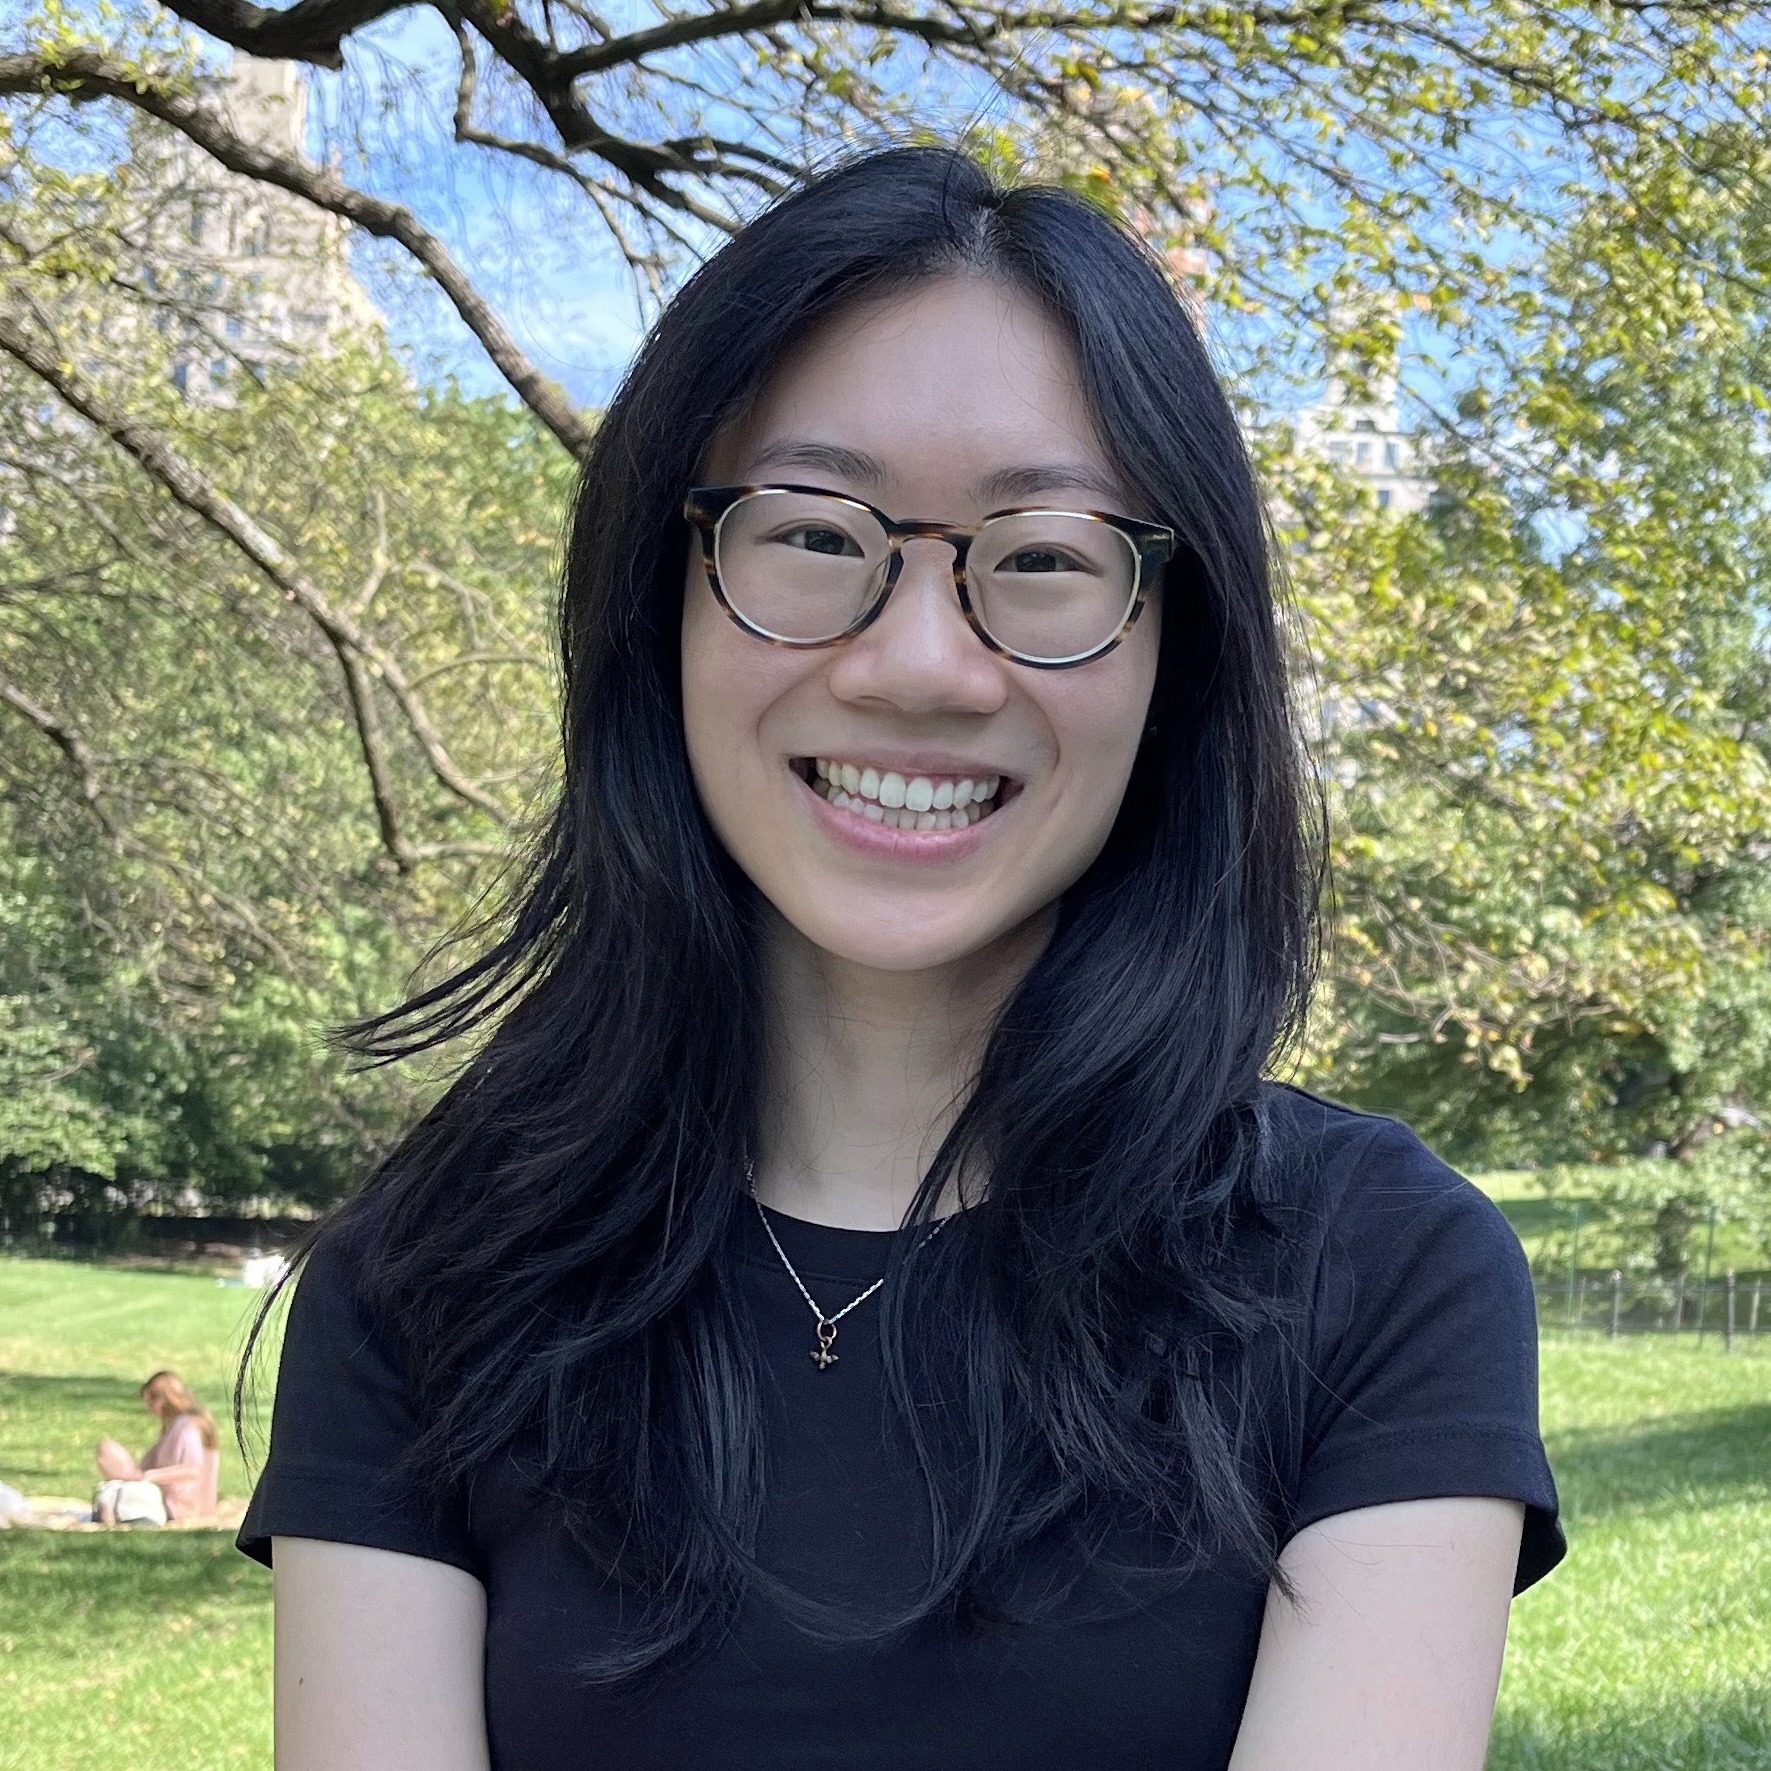 Profile picture of CPDP graduate student Theresa Lin